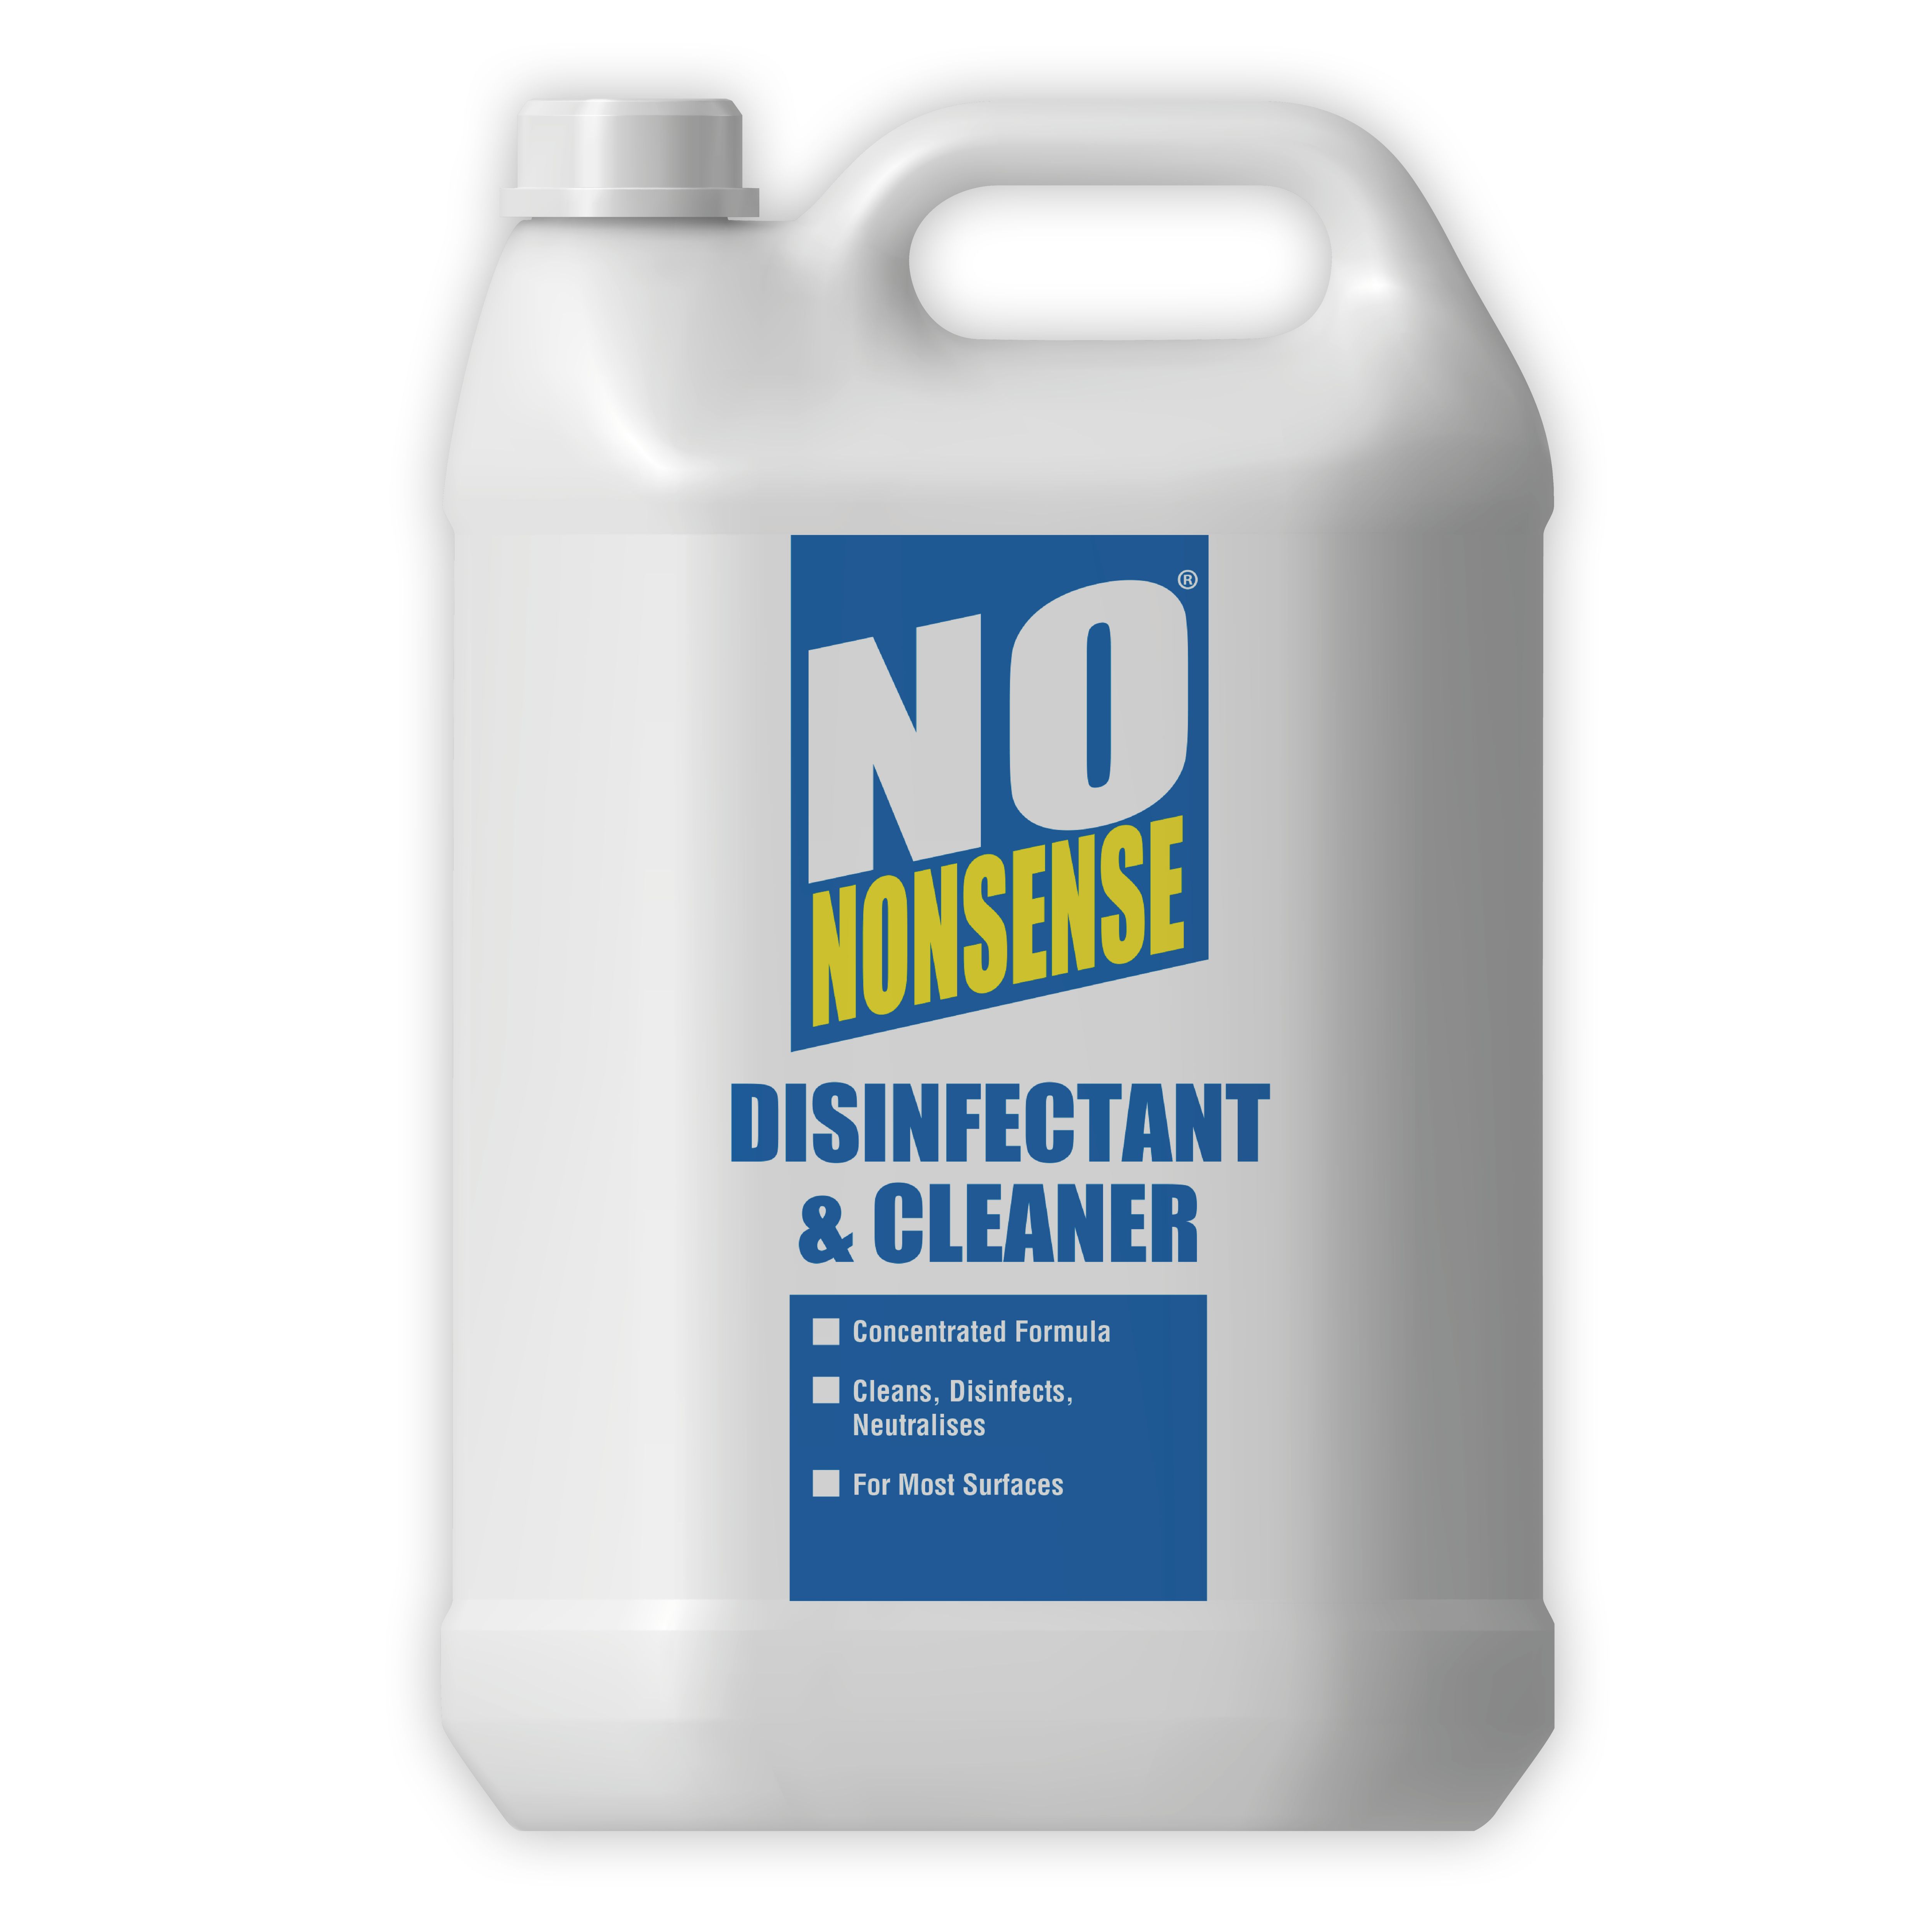 https://media.diy.com/is/image/Kingfisher/no-nonsense-disinfectant-concentrated-not-anti-bacterial-multi-surface-hard-non-porous-surfaces-any-room-disinfectant-cleaner-5l-bottle~01068849_02c_bq?$MOB_PREV$&$width=768&$height=768